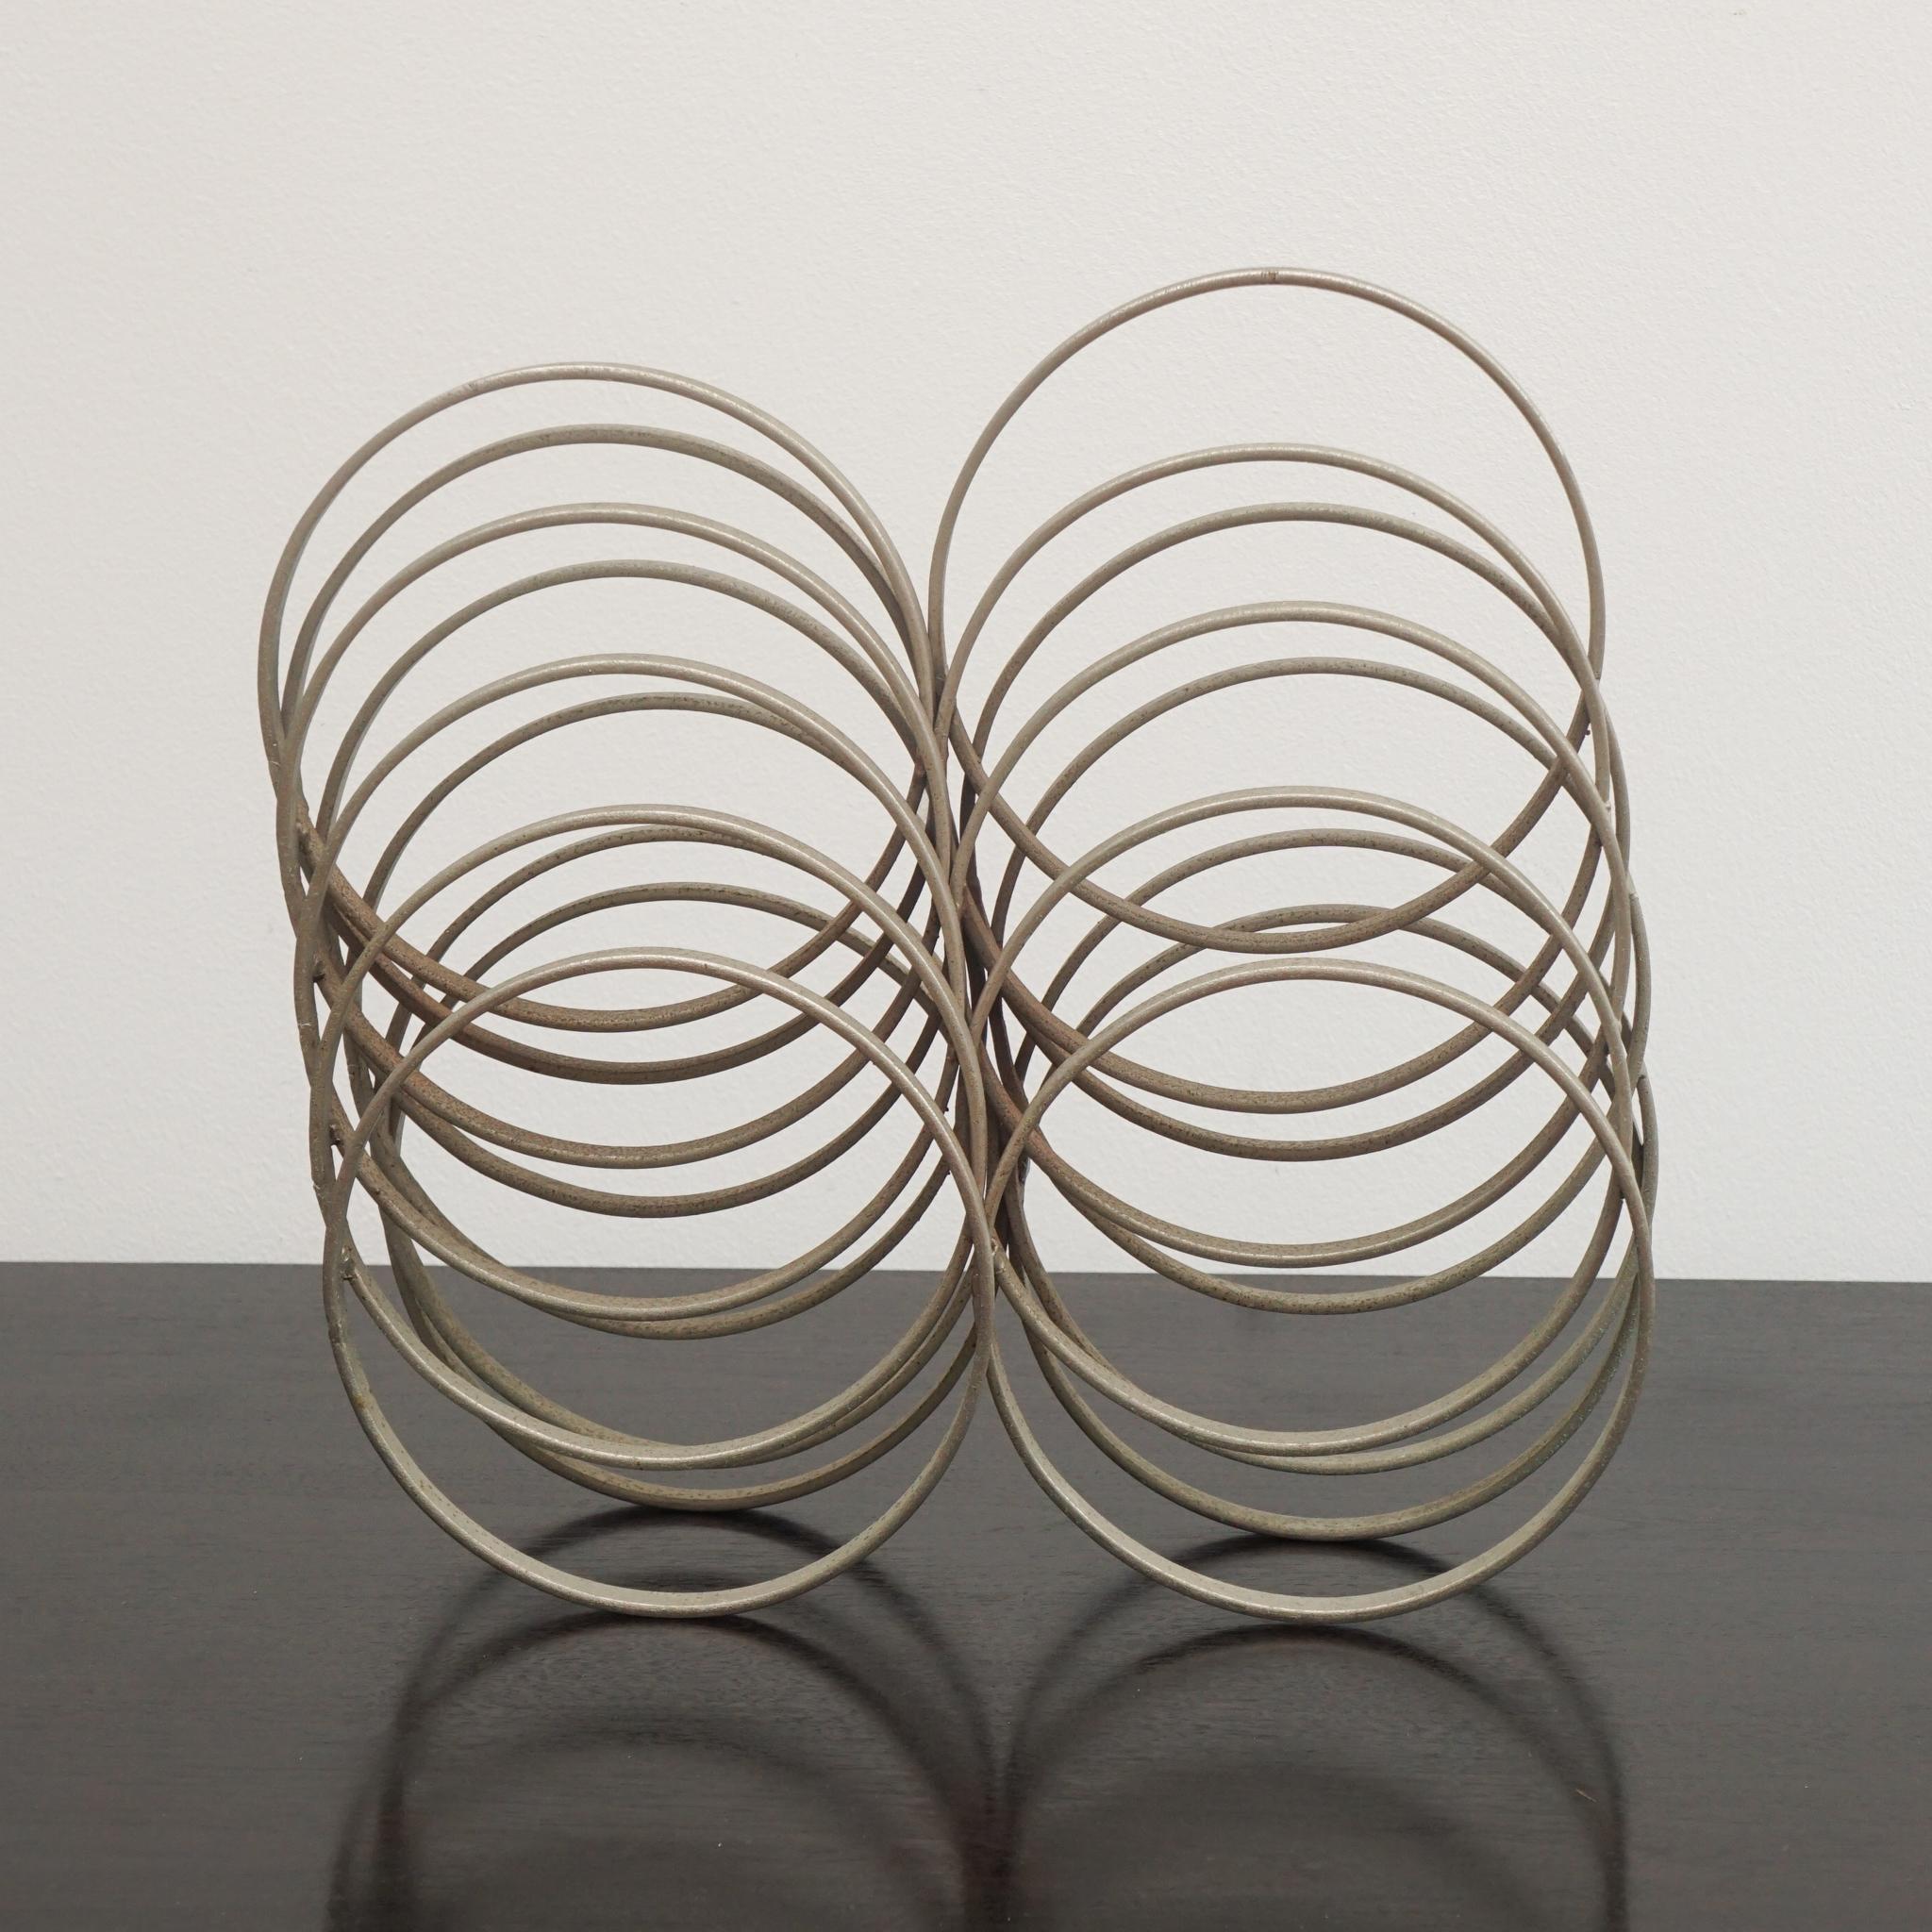 Metal rings were used to create the unusual stepped sculpture, shown here, from Italy c. 1970s.   Arranged in ascending and descending order, the coils are soldered in place to create a free-standing vertical or horizontal work of art.  